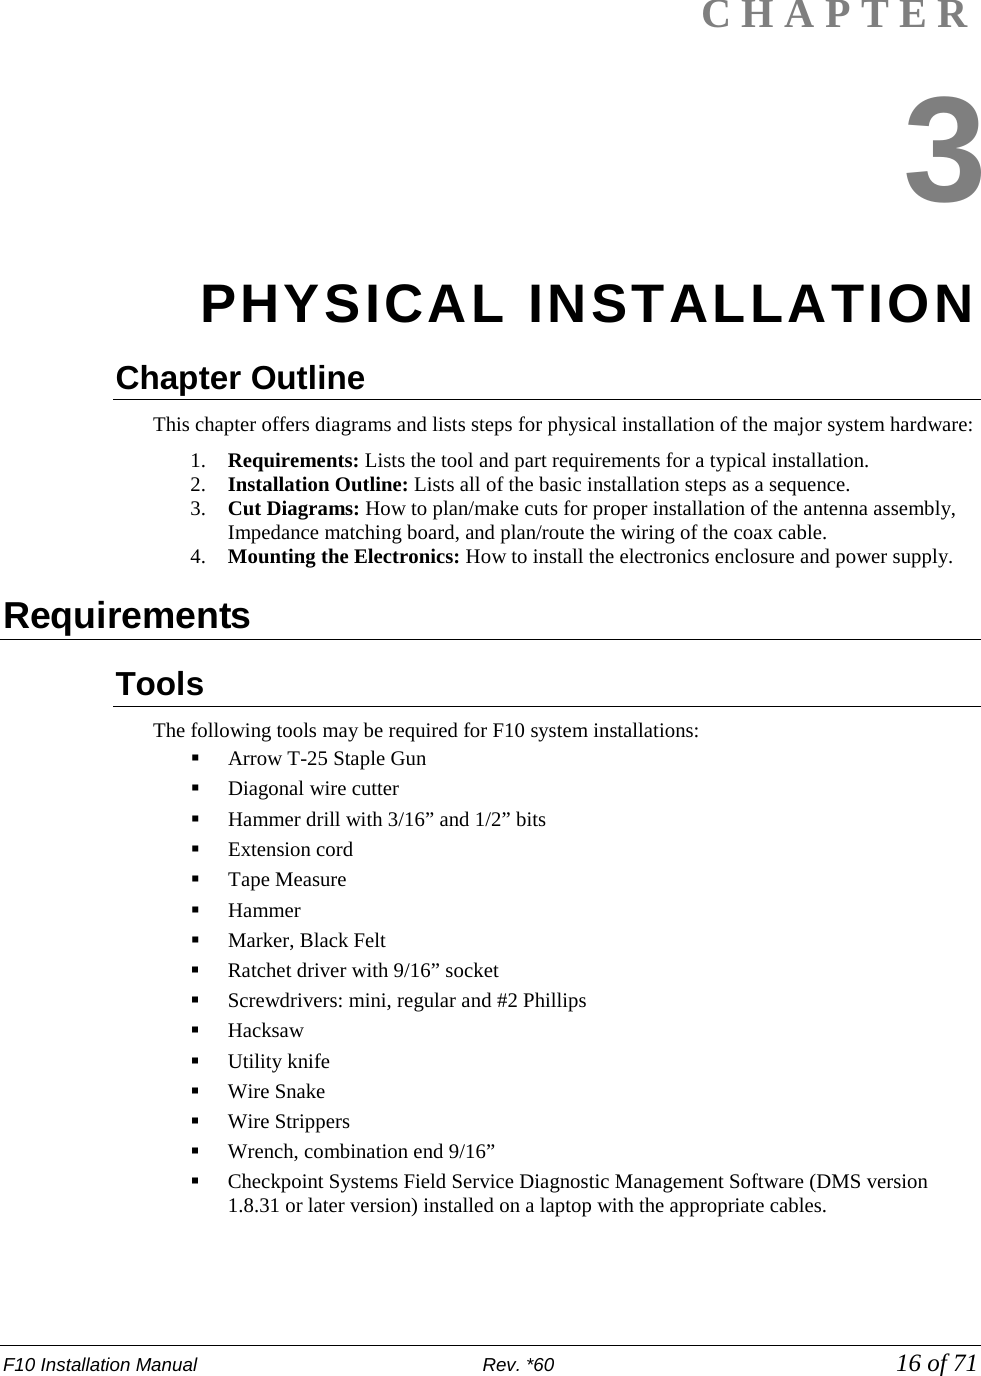 F10 Installation Manual                          Rev. *60            16 of 71  CHAPTER 3 PHYSICAL INSTALLATION Chapter Outline  This chapter offers diagrams and lists steps for physical installation of the major system hardware: 1. Requirements: Lists the tool and part requirements for a typical installation. 2. Installation Outline: Lists all of the basic installation steps as a sequence. 3. Cut Diagrams: How to plan/make cuts for proper installation of the antenna assembly, Impedance matching board, and plan/route the wiring of the coax cable. 4. Mounting the Electronics: How to install the electronics enclosure and power supply.  Requirements Tools  The following tools may be required for F10 system installations:   Arrow T-25 Staple Gun  Diagonal wire cutter   Hammer drill with 3/16” and 1/2” bits   Extension cord   Tape Measure  Hammer   Marker, Black Felt   Ratchet driver with 9/16” socket  Screwdrivers: mini, regular and #2 Phillips      Hacksaw  Utility knife   Wire Snake  Wire Strippers   Wrench, combination end 9/16”  Checkpoint Systems Field Service Diagnostic Management Software (DMS version 1.8.31 or later version) installed on a laptop with the appropriate cables.  